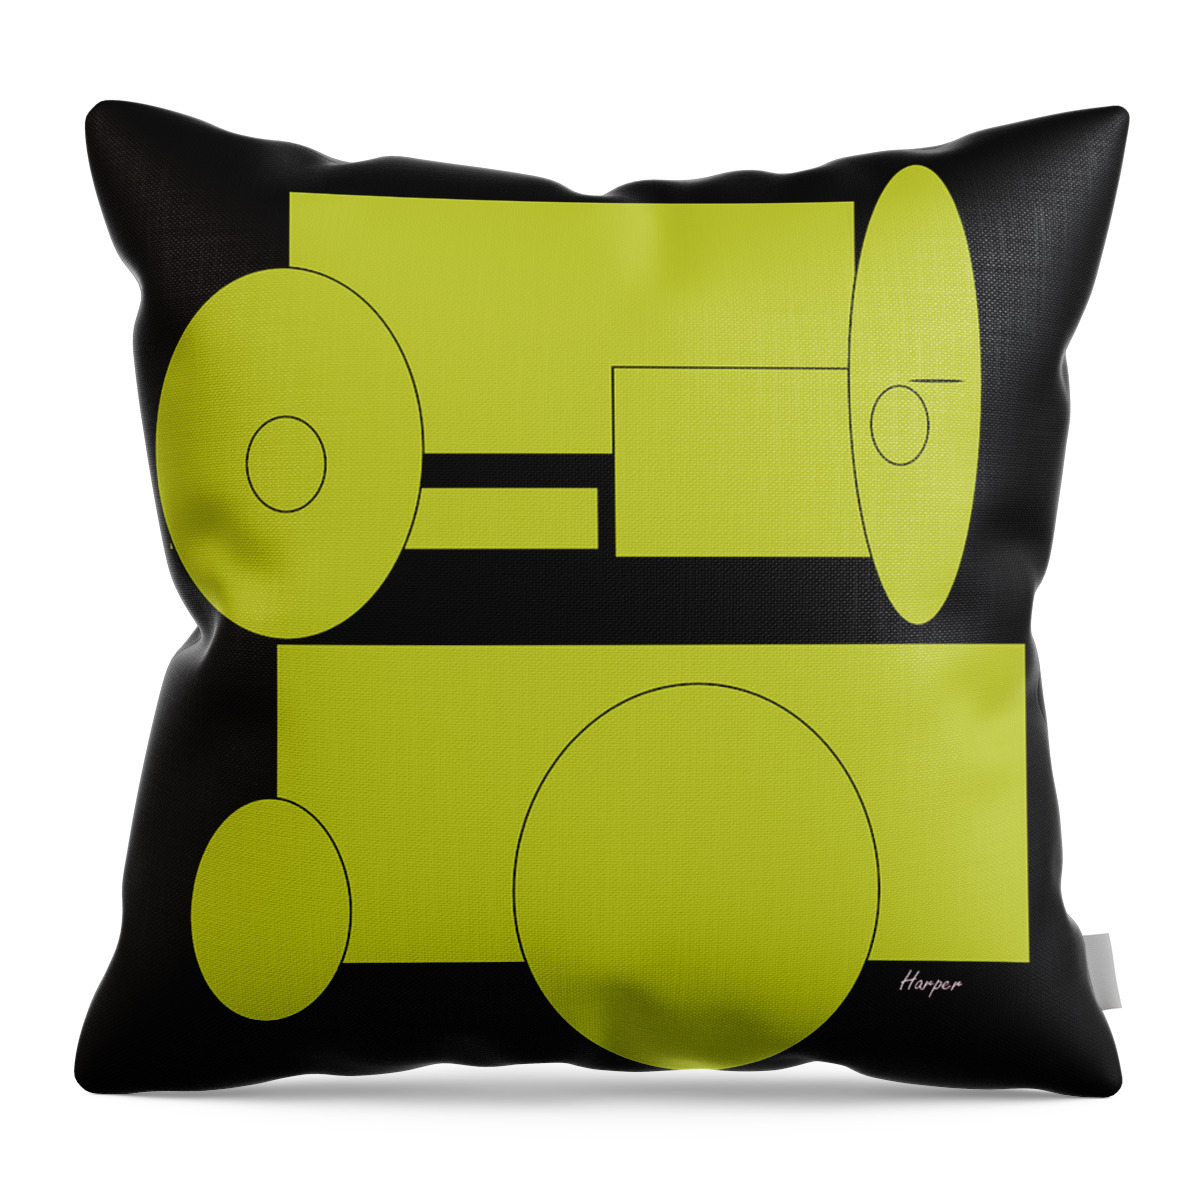 Designs Throw Pillow featuring the digital art Yellow on Black by Cathy Harper